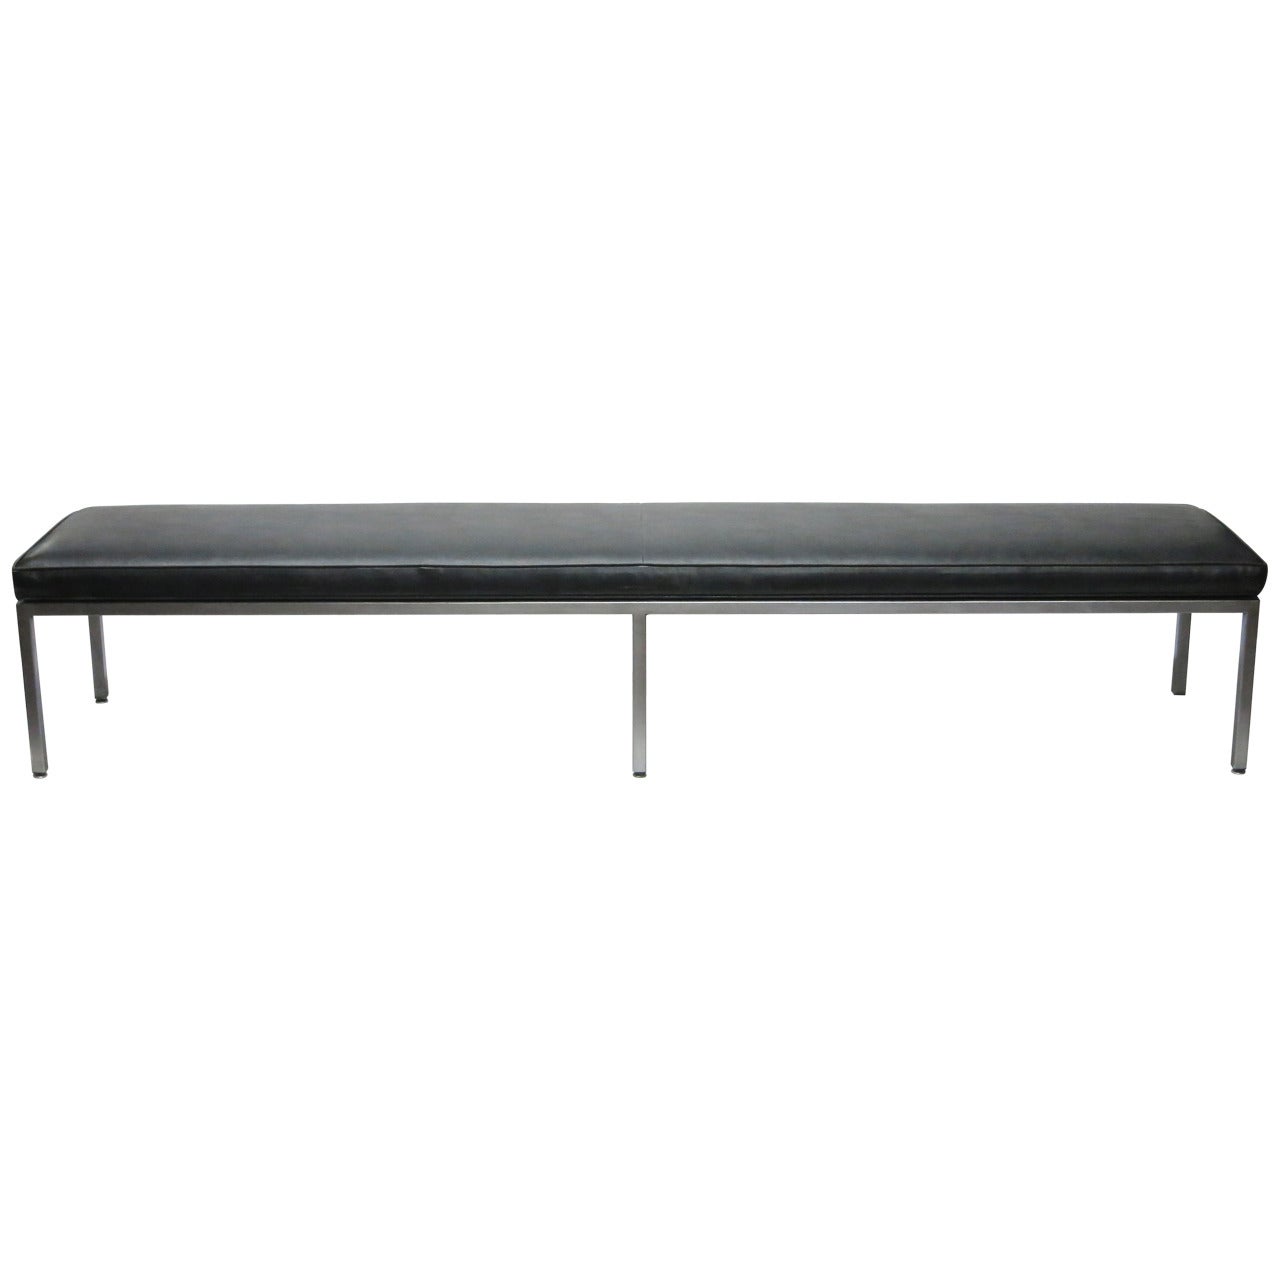 Lon Bench in Seamless Steel and Black Leather Seat, America, circa 1985